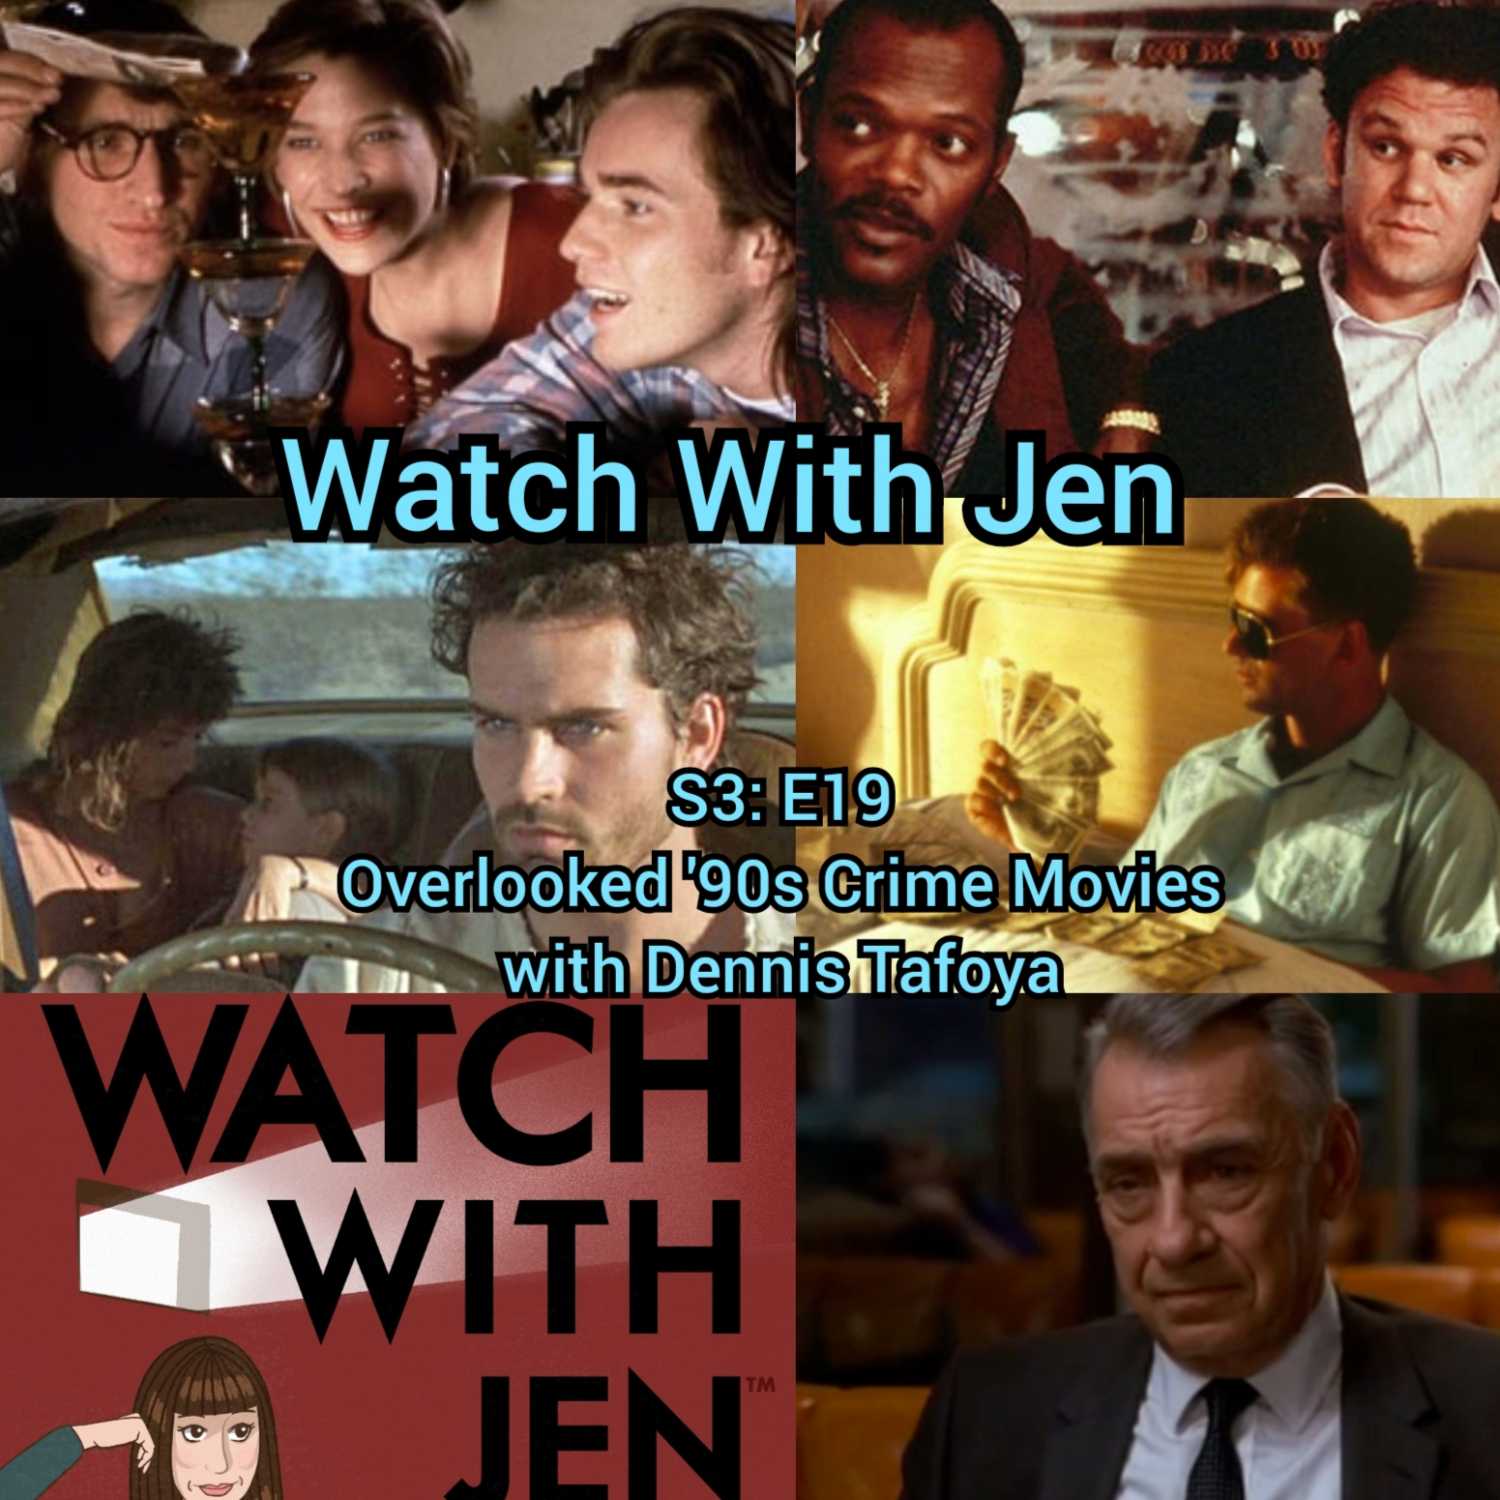 Watch With Jen - S3: E19 - Overlooked '90s Crime Movies with Dennis Tafoya